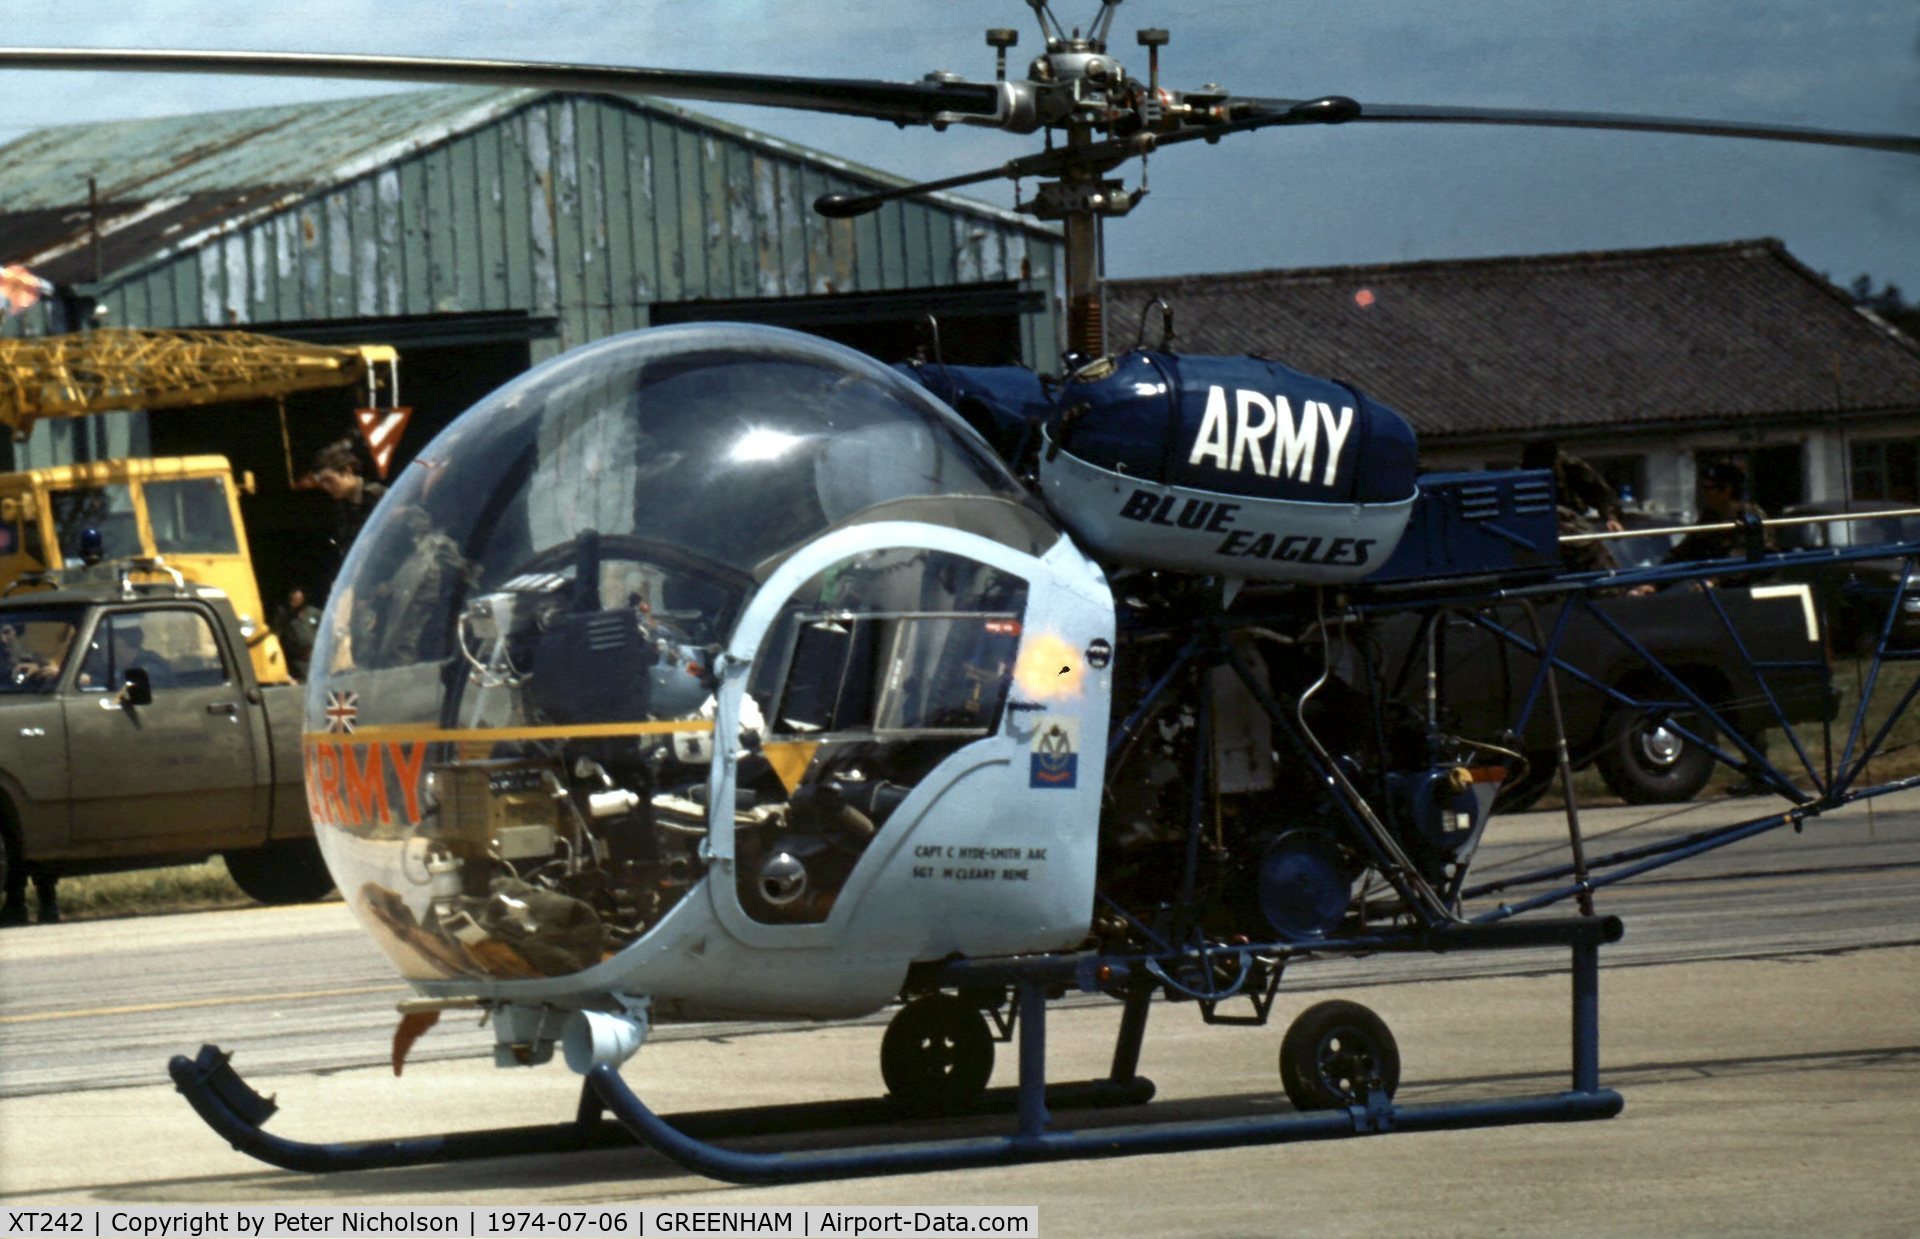 XT242, 1966 Westland Sioux AH.1 C/N WA401, Sioux AH.1 of the Blue Eagles helicopter display team at the 1974 Intnl Air Tattoo at RAF Greenham Common.